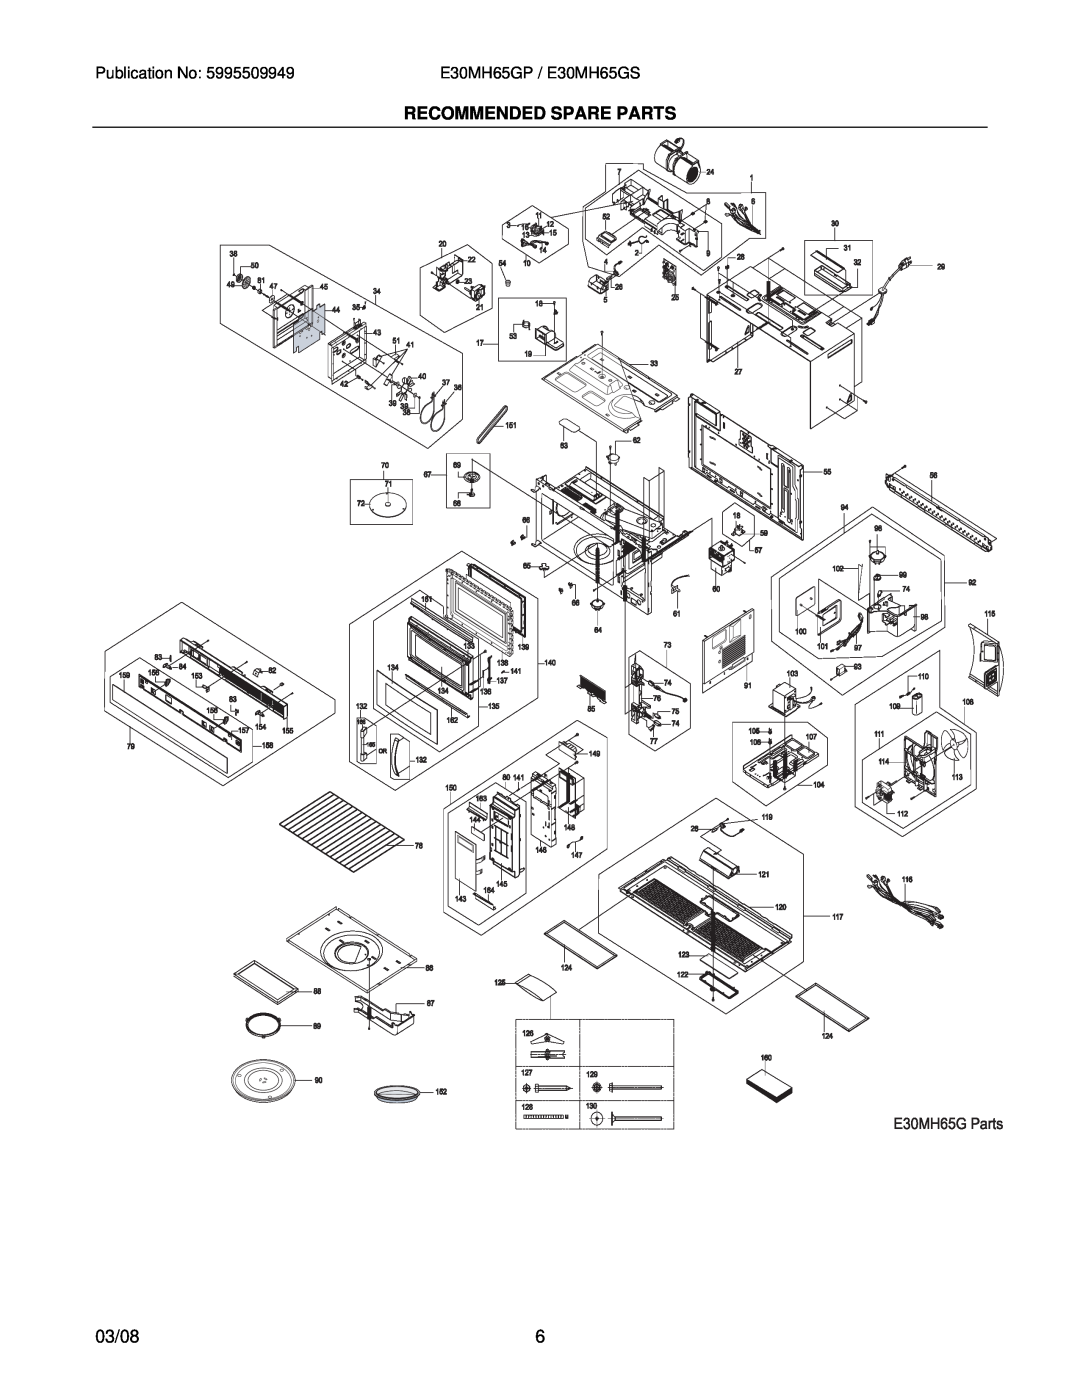 Electrolux E30MH65GPSA, E30MH65GSSA installation instructions Recommended Spare Parts, 03/08 